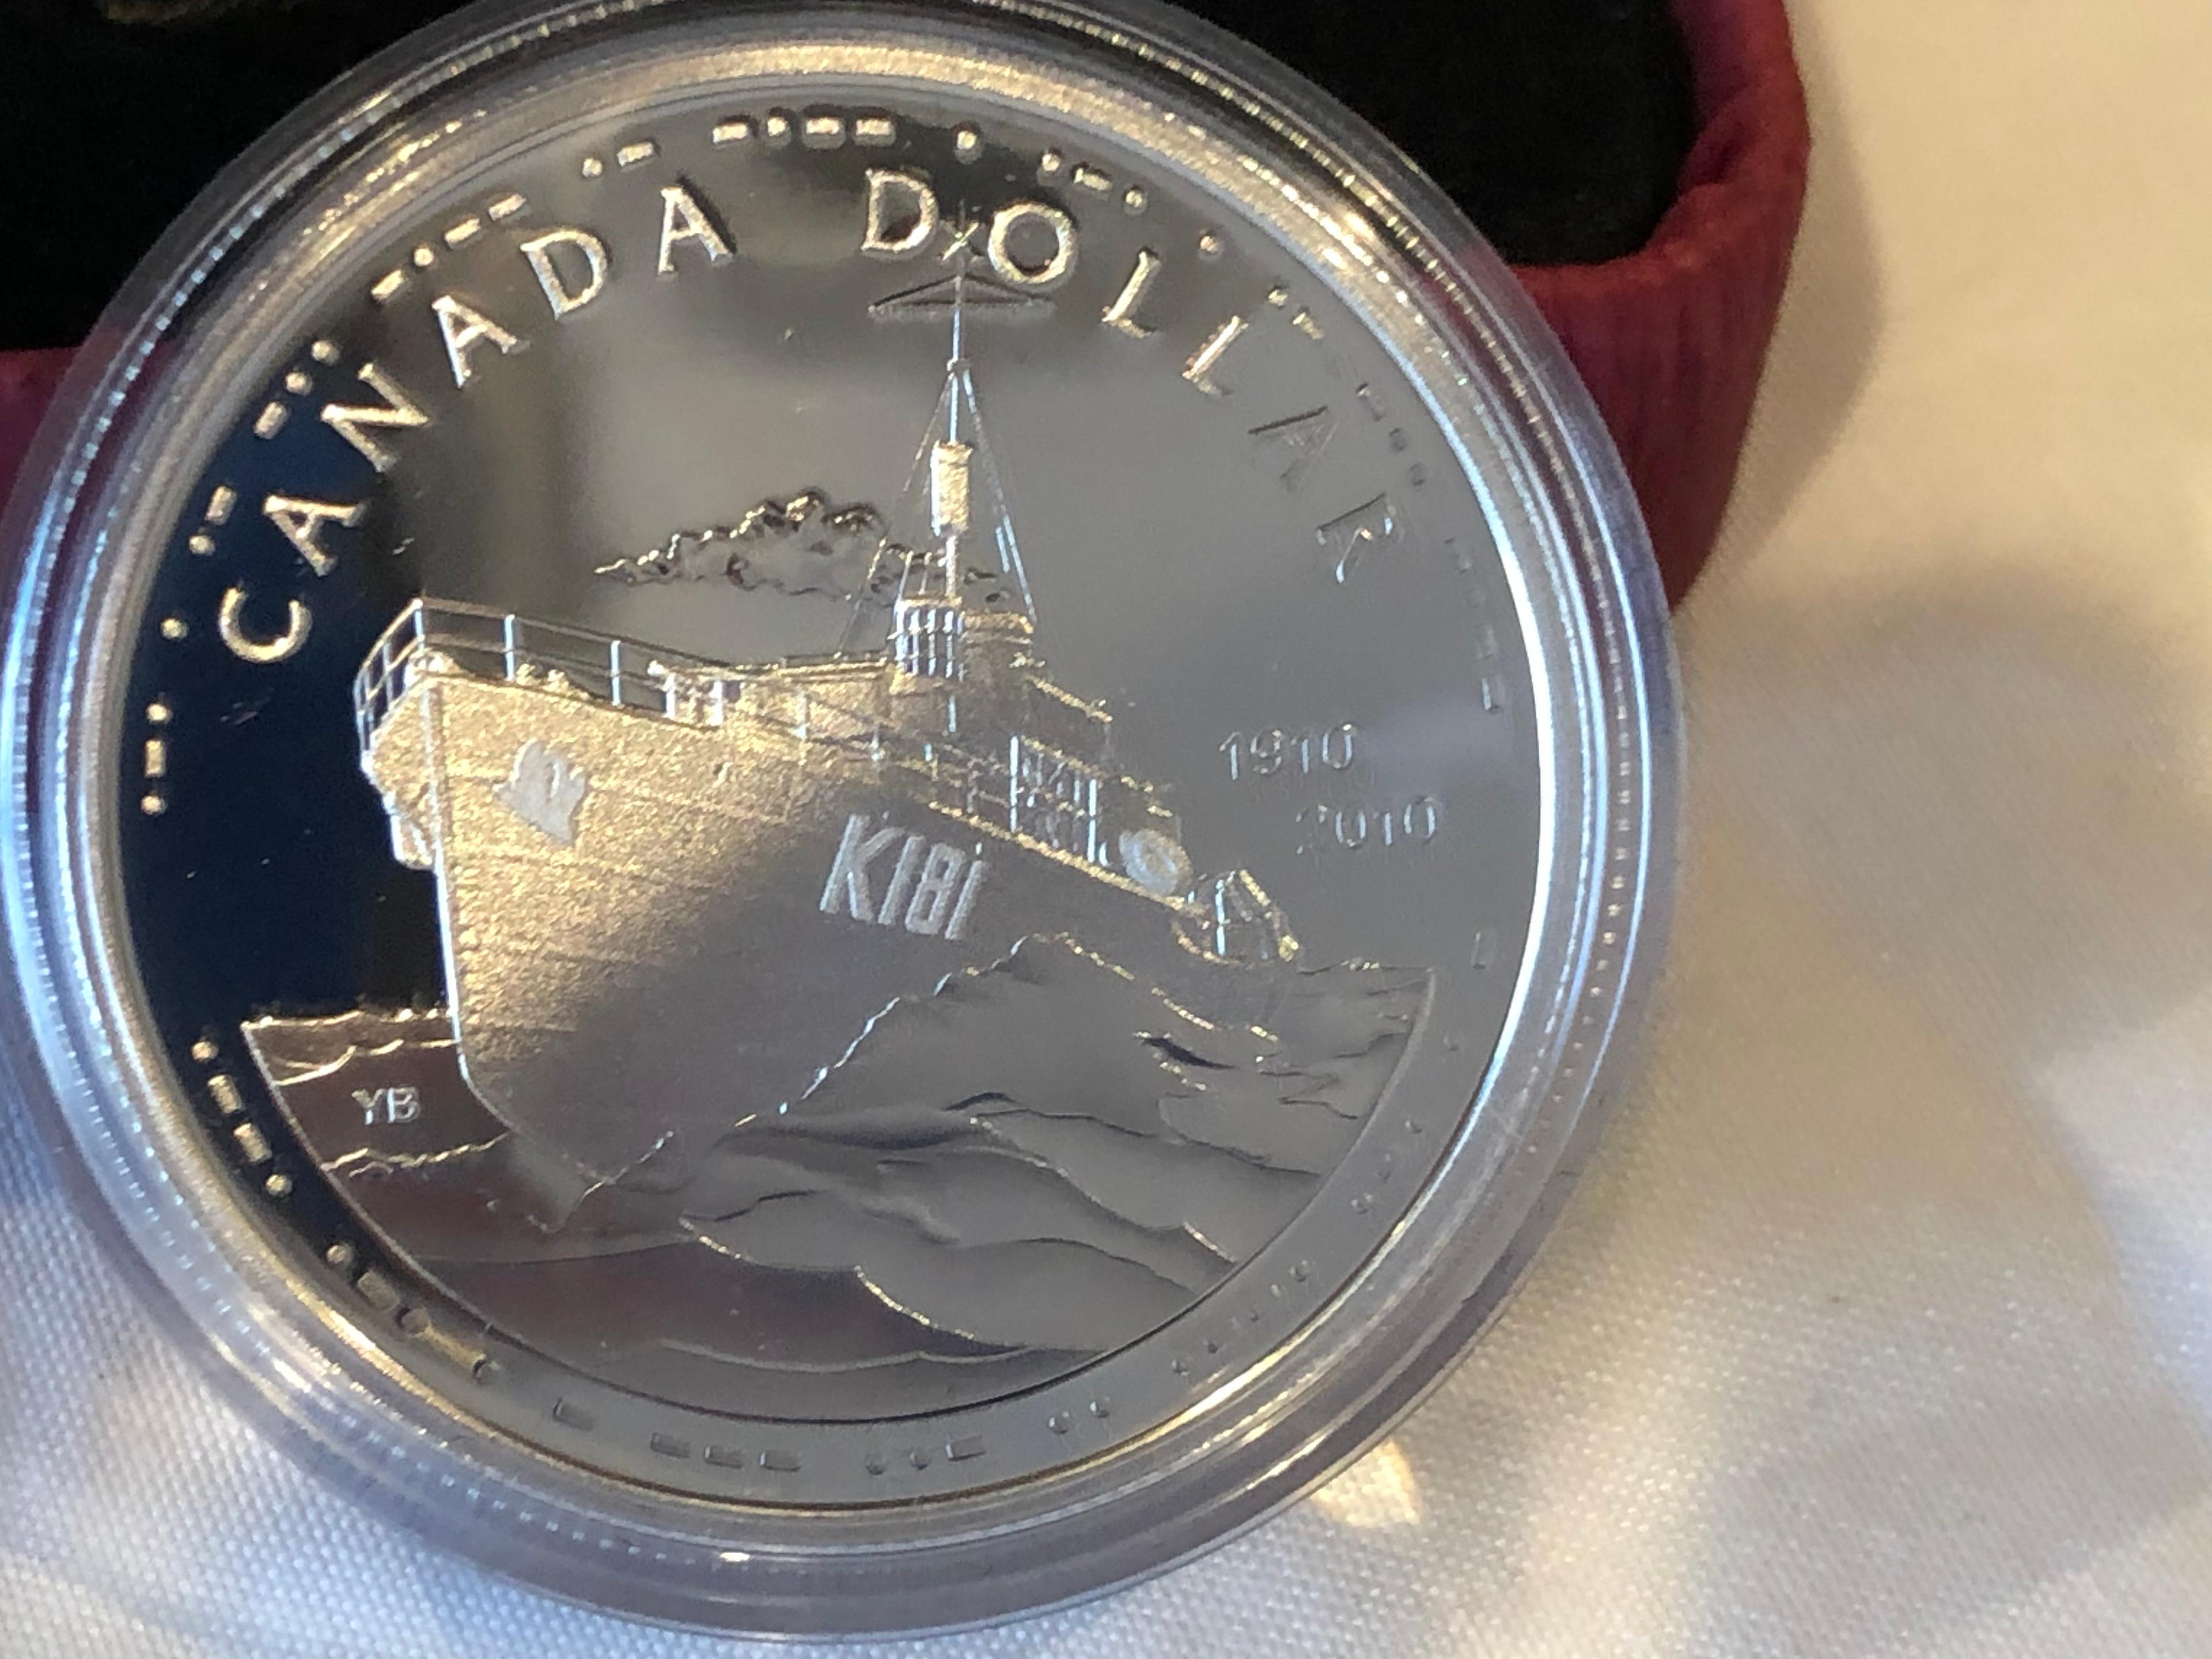 2010 Proof Silver Canadian Dollar.